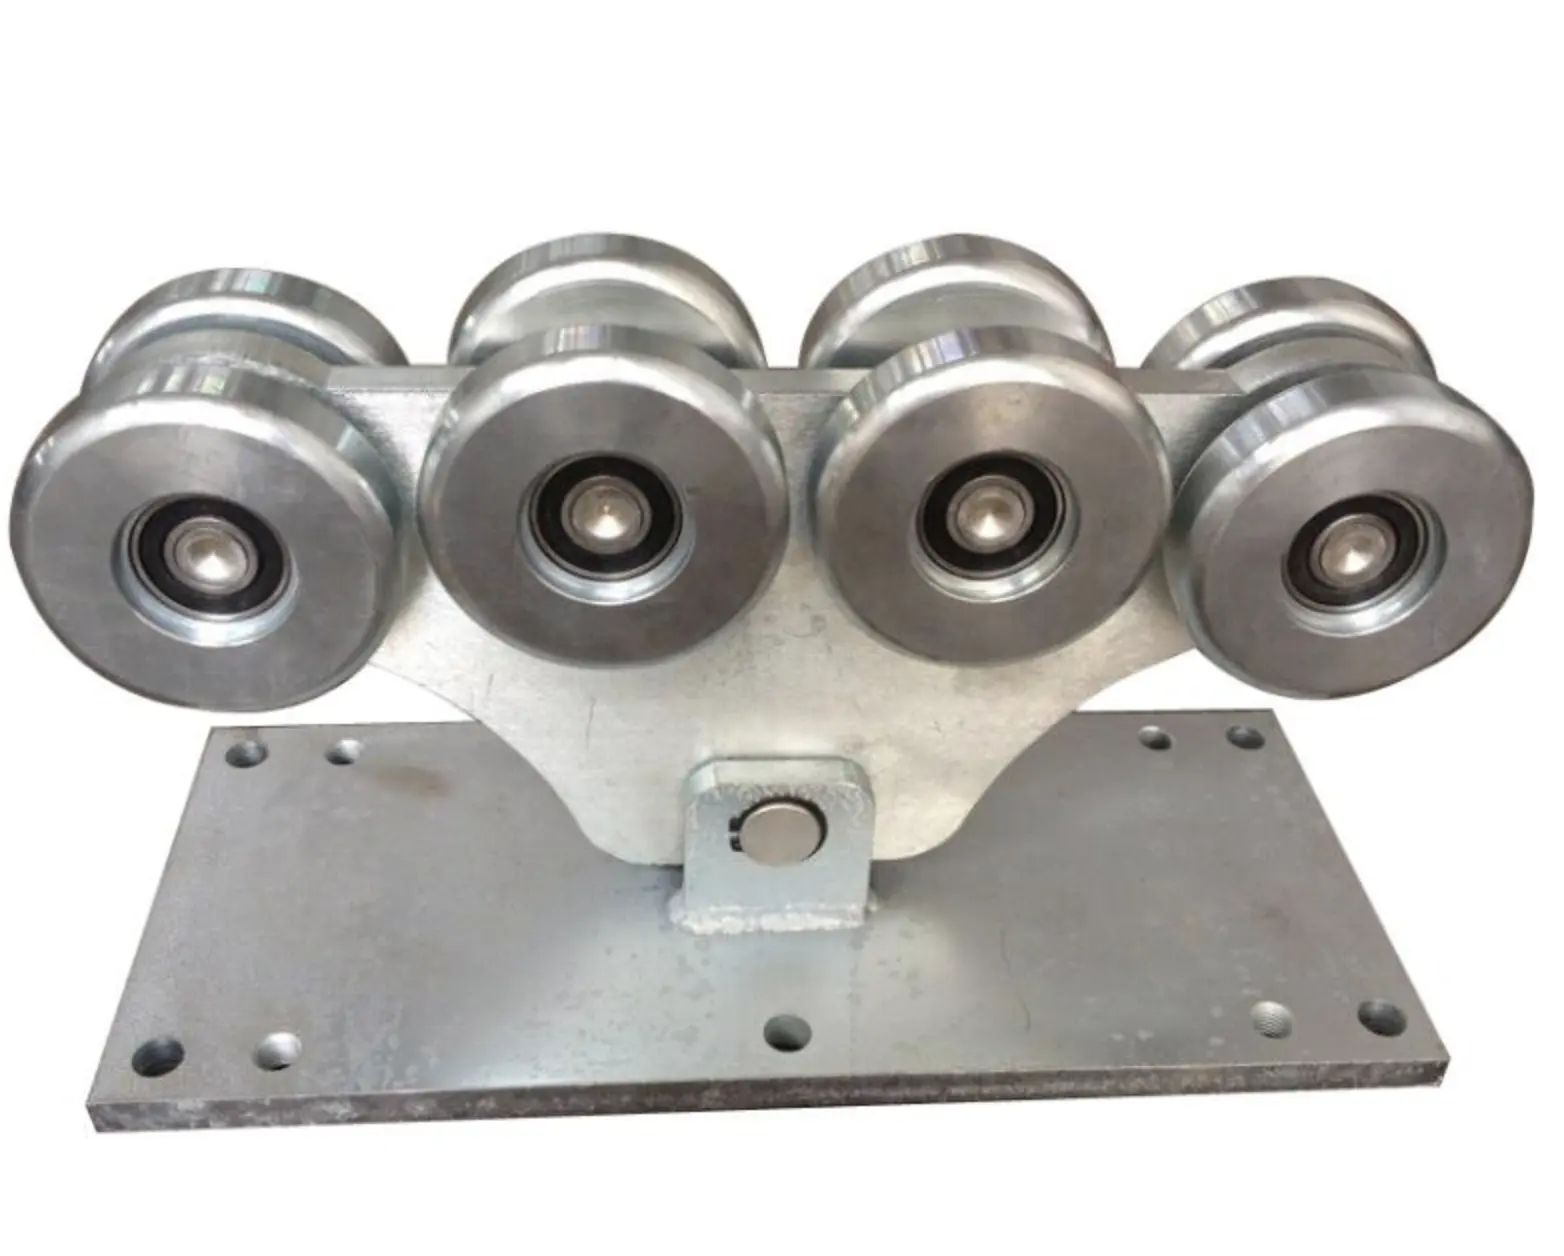 Heavy duty cantilever gate carriage wheel for cantilever sliding gate